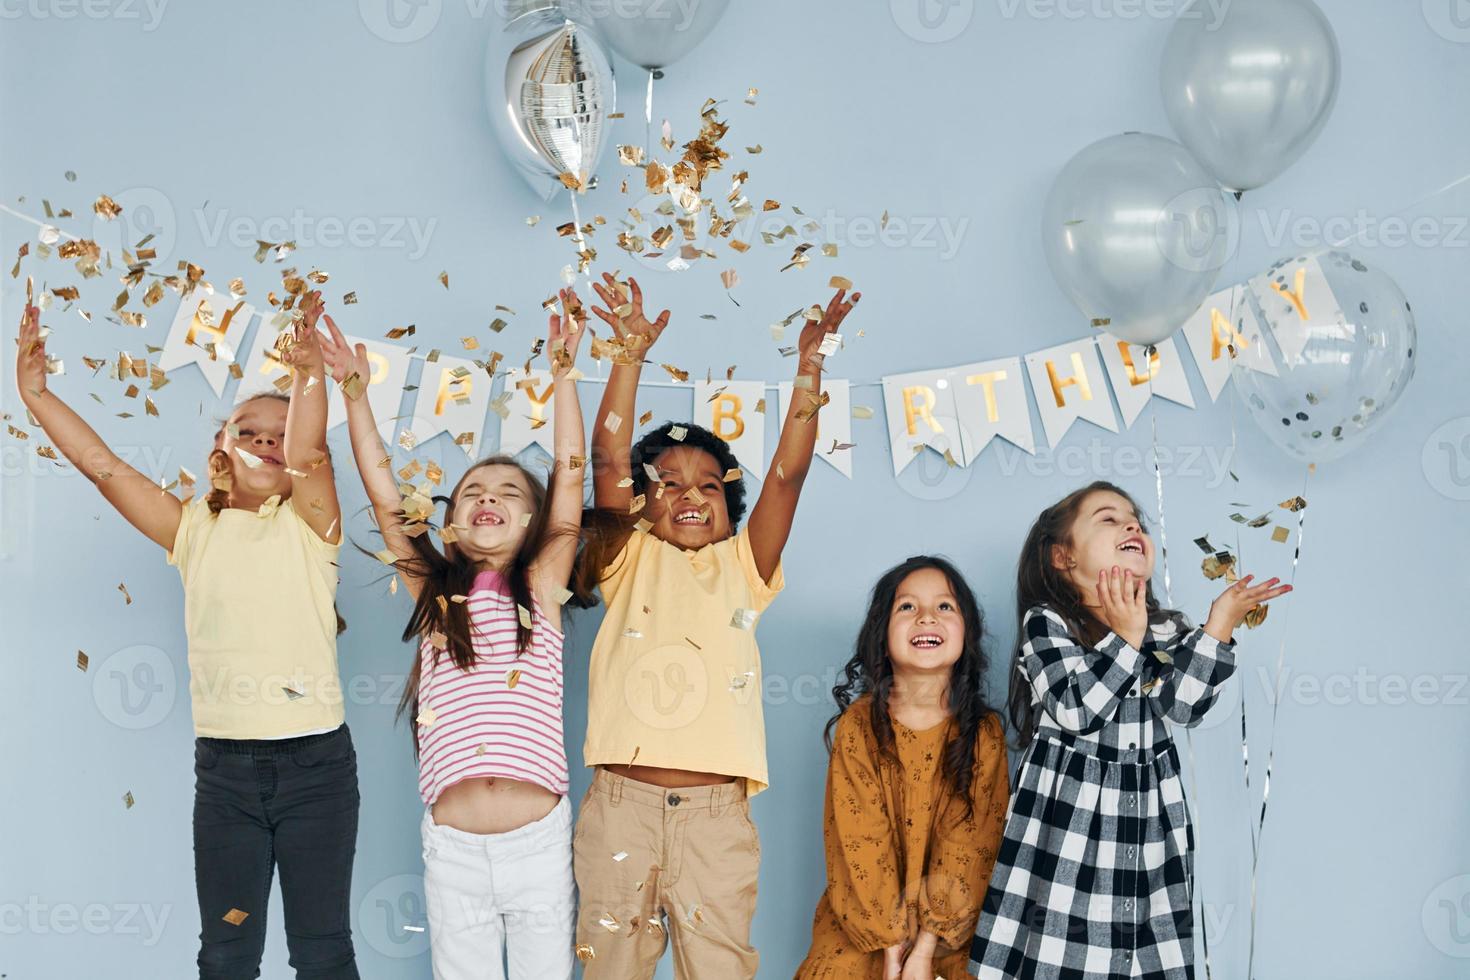 Balloons and confetti. Children on celebrating birthday party indoors have fun together photo